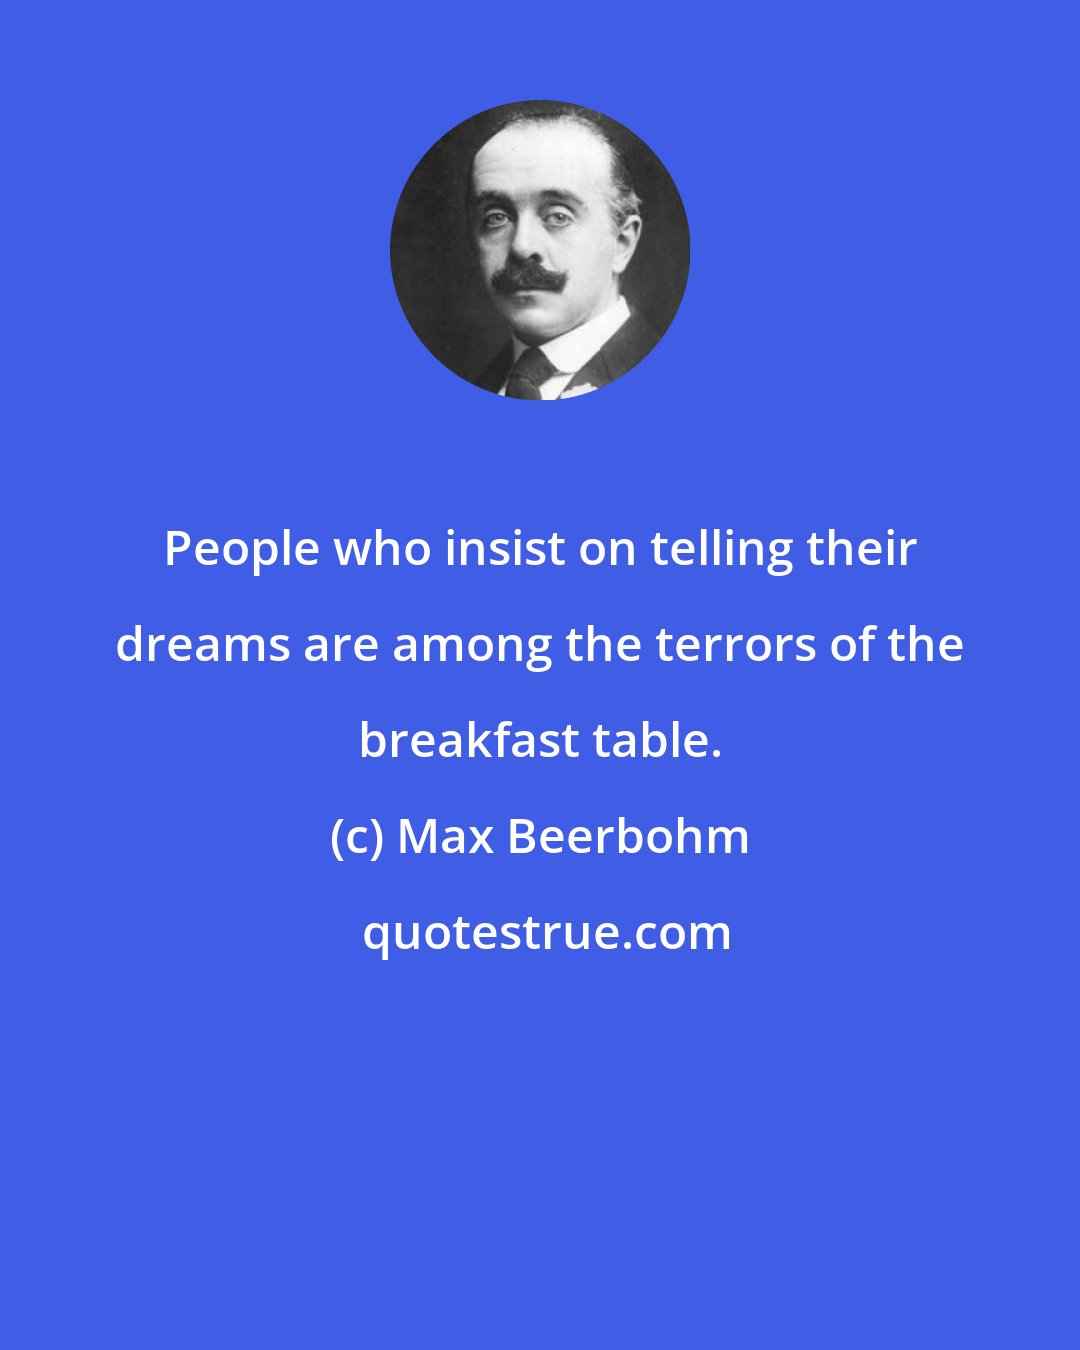 Max Beerbohm: People who insist on telling their dreams are among the terrors of the breakfast table.